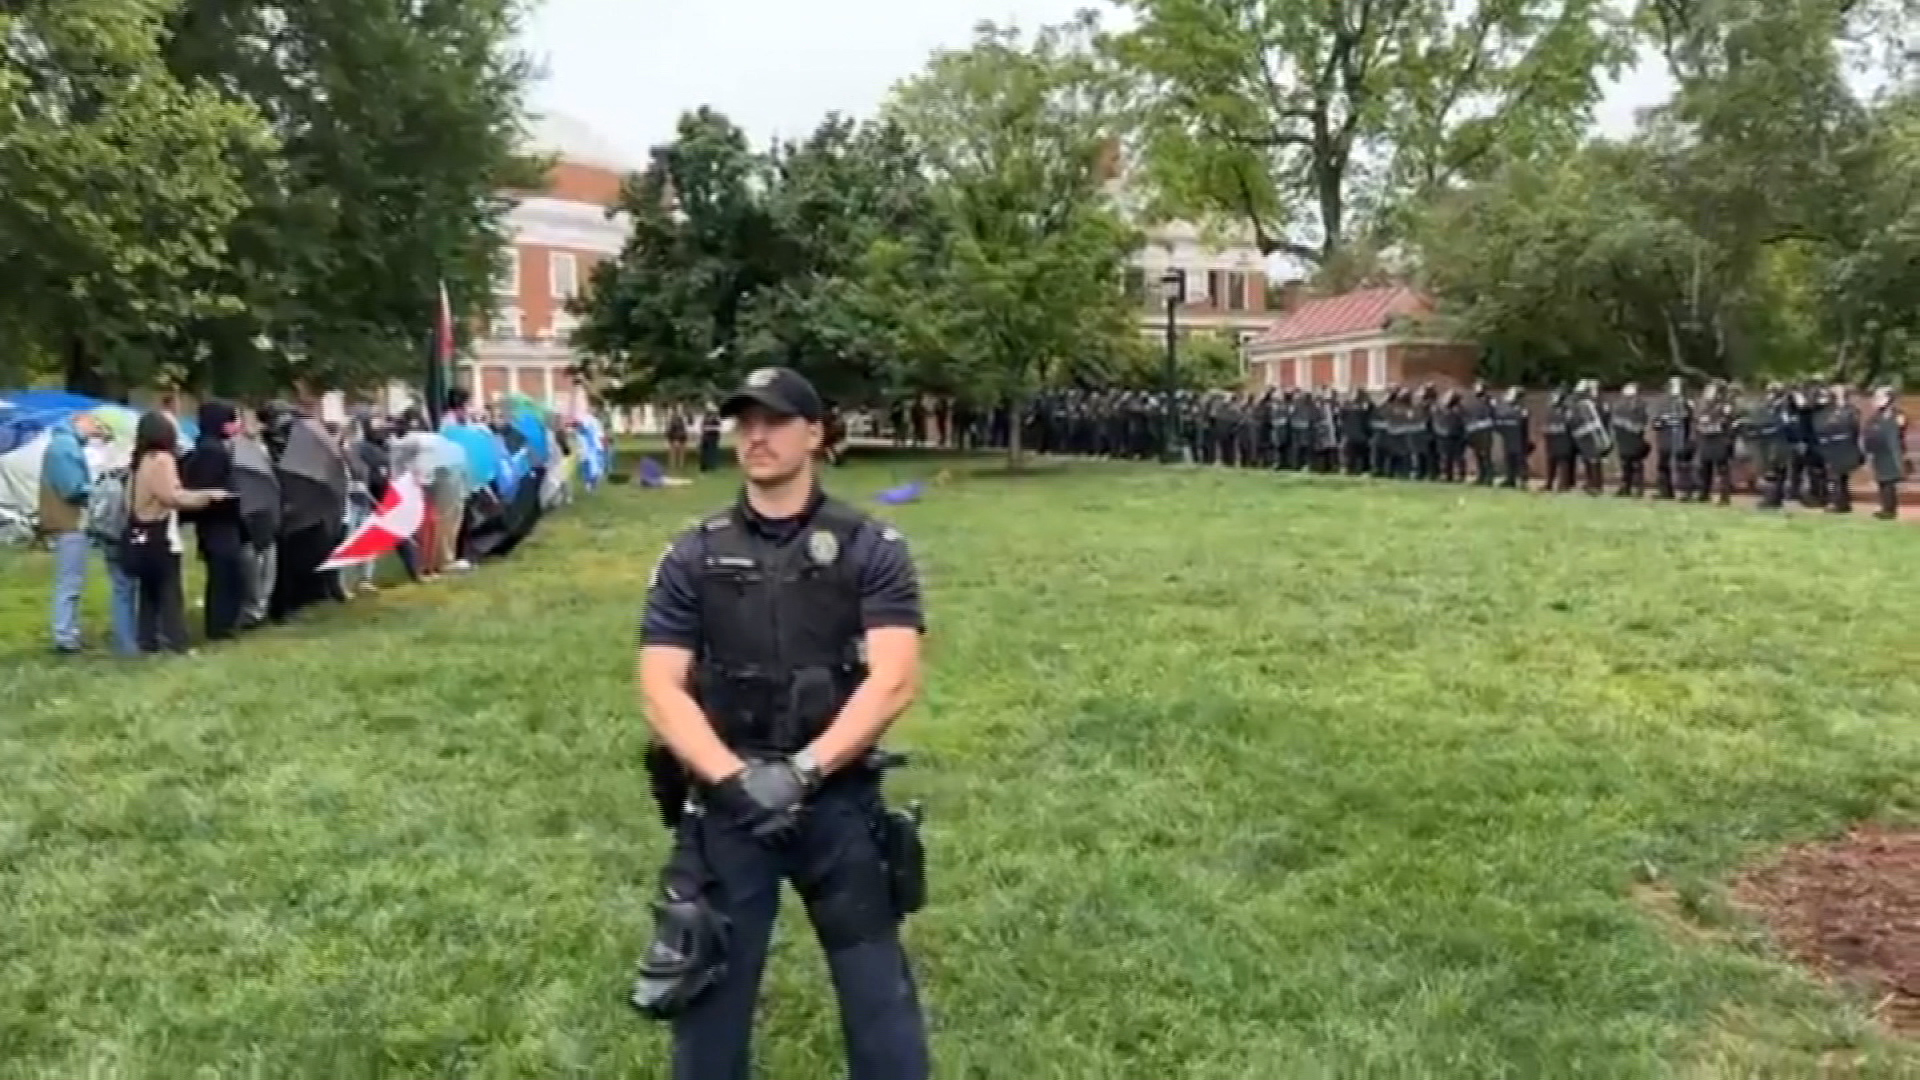 Police are seen during a pro-Palestinian protest at the University of Virginia in Charlottesville on May 4.